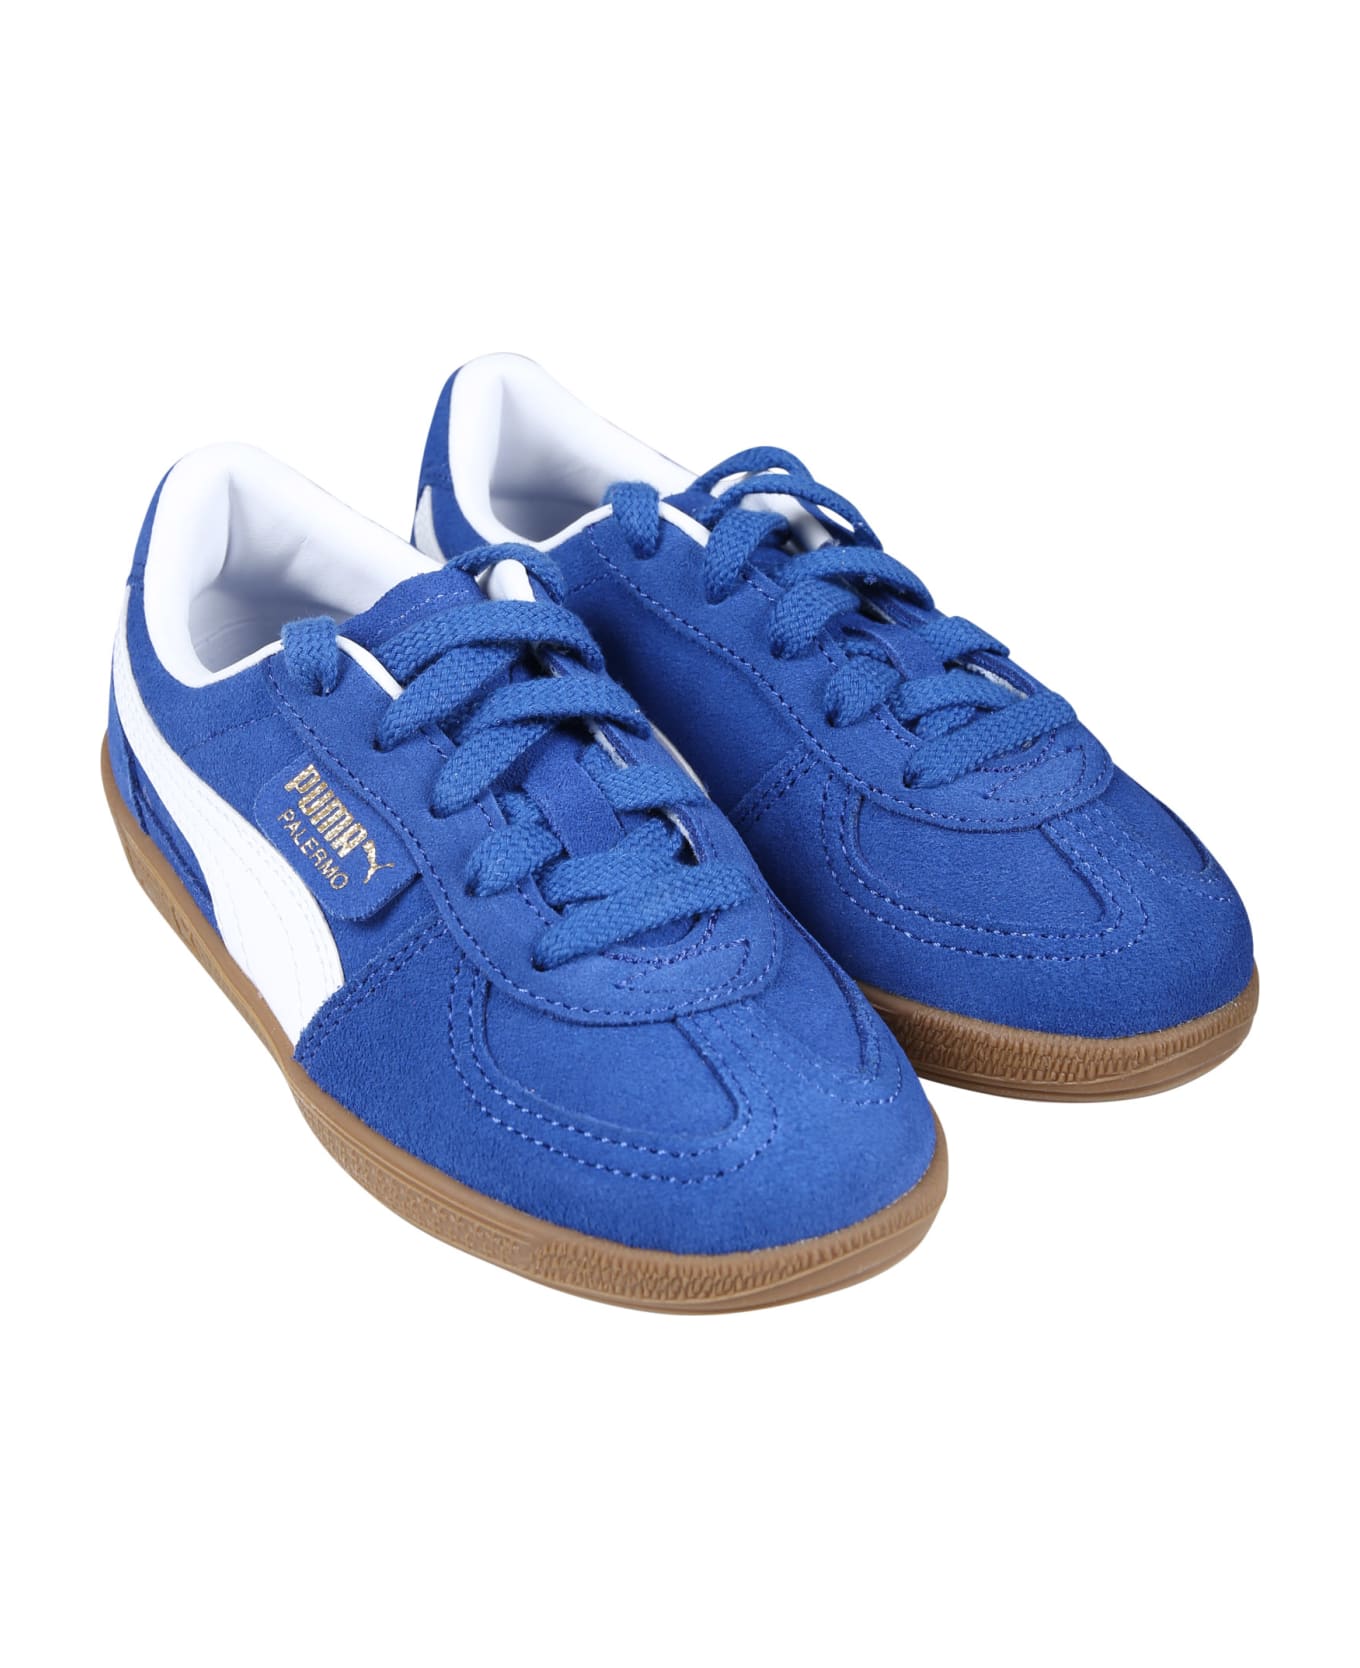 Puma Palermo Ps Light Blue Low Sneakers For Kids - Light Blue シューズ